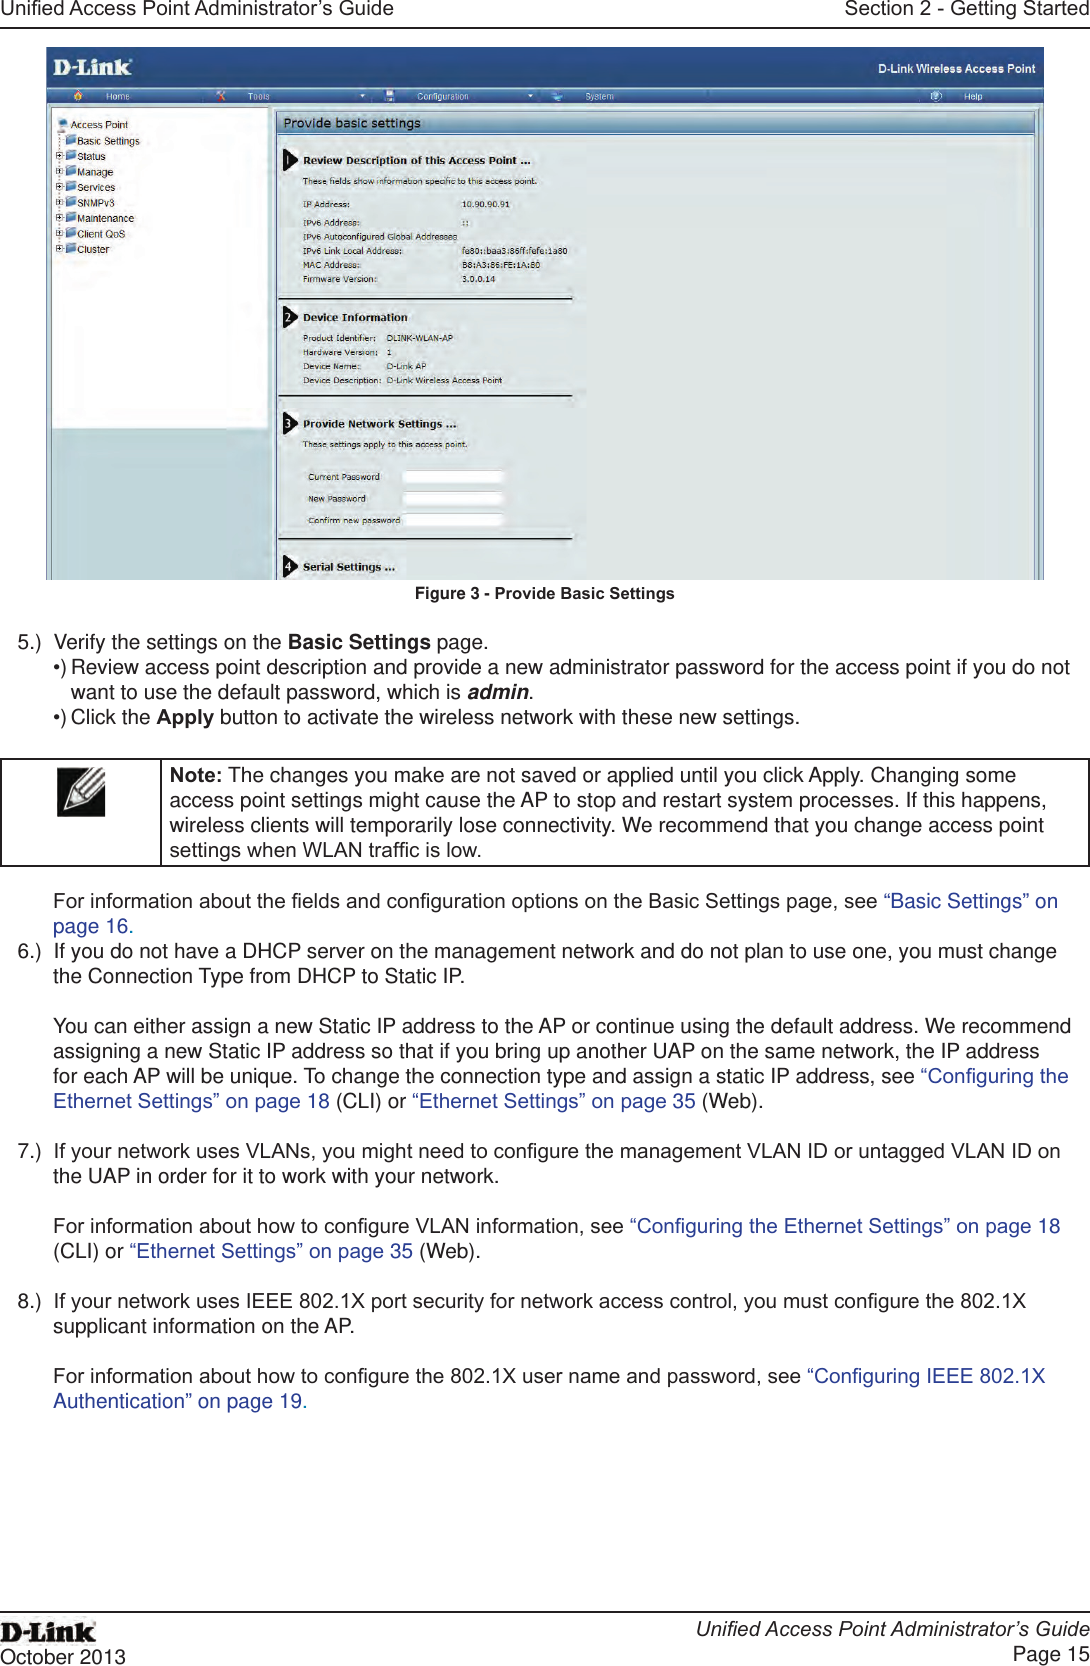 Unied Access Point Administrator’s GuideUnied Access Point Administrator’s GuidePage 15October 2013Section 2 - Getting StartedFigure 3 - Provide Basic Settings5.)  Verify the settings on the Basic Settings page.•) Review access point description and provide a new administrator password for the access point if you do not want to use the default password, which is admin.•) Click the Apply button to activate the wireless network with these new settings. Note: The changes you make are not saved or applied until you click Apply. Changing some access point settings might cause the AP to stop and restart system processes. If this happens, wireless clients will temporarily lose connectivity. We recommend that you change access point settings when WLAN trafc is low. For information about the elds and conguration options on the Basic Settings page, see “Basic Settings” on page 16.6.)  If you do not have a DHCP server on the management network and do not plan to use one, you must change the Connection Type from DHCP to Static IP. You can either assign a new Static IP address to the AP or continue using the default address. We recommend assigning a new Static IP address so that if you bring up another UAP on the same network, the IP address for each AP will be unique. To change the connection type and assign a static IP address, see “Conguring the Ethernet Settings” on page 18 (CLI) or “Ethernet Settings” on page 35 (Web).7.)  If your network uses VLANs, you might need to congure the management VLAN ID or untagged VLAN ID on the UAP in order for it to work with your network. For information about how to congure VLAN information, see “Conguring the Ethernet Settings” on page 18 (CLI) or “Ethernet Settings” on page 35 (Web).8.)  If your network uses IEEE 802.1X port security for network access control, you must congure the 802.1X supplicant information on the AP.For information about how to congure the 802.1X user name and password, see “Conguring IEEE 802.1X Authentication” on page 19.